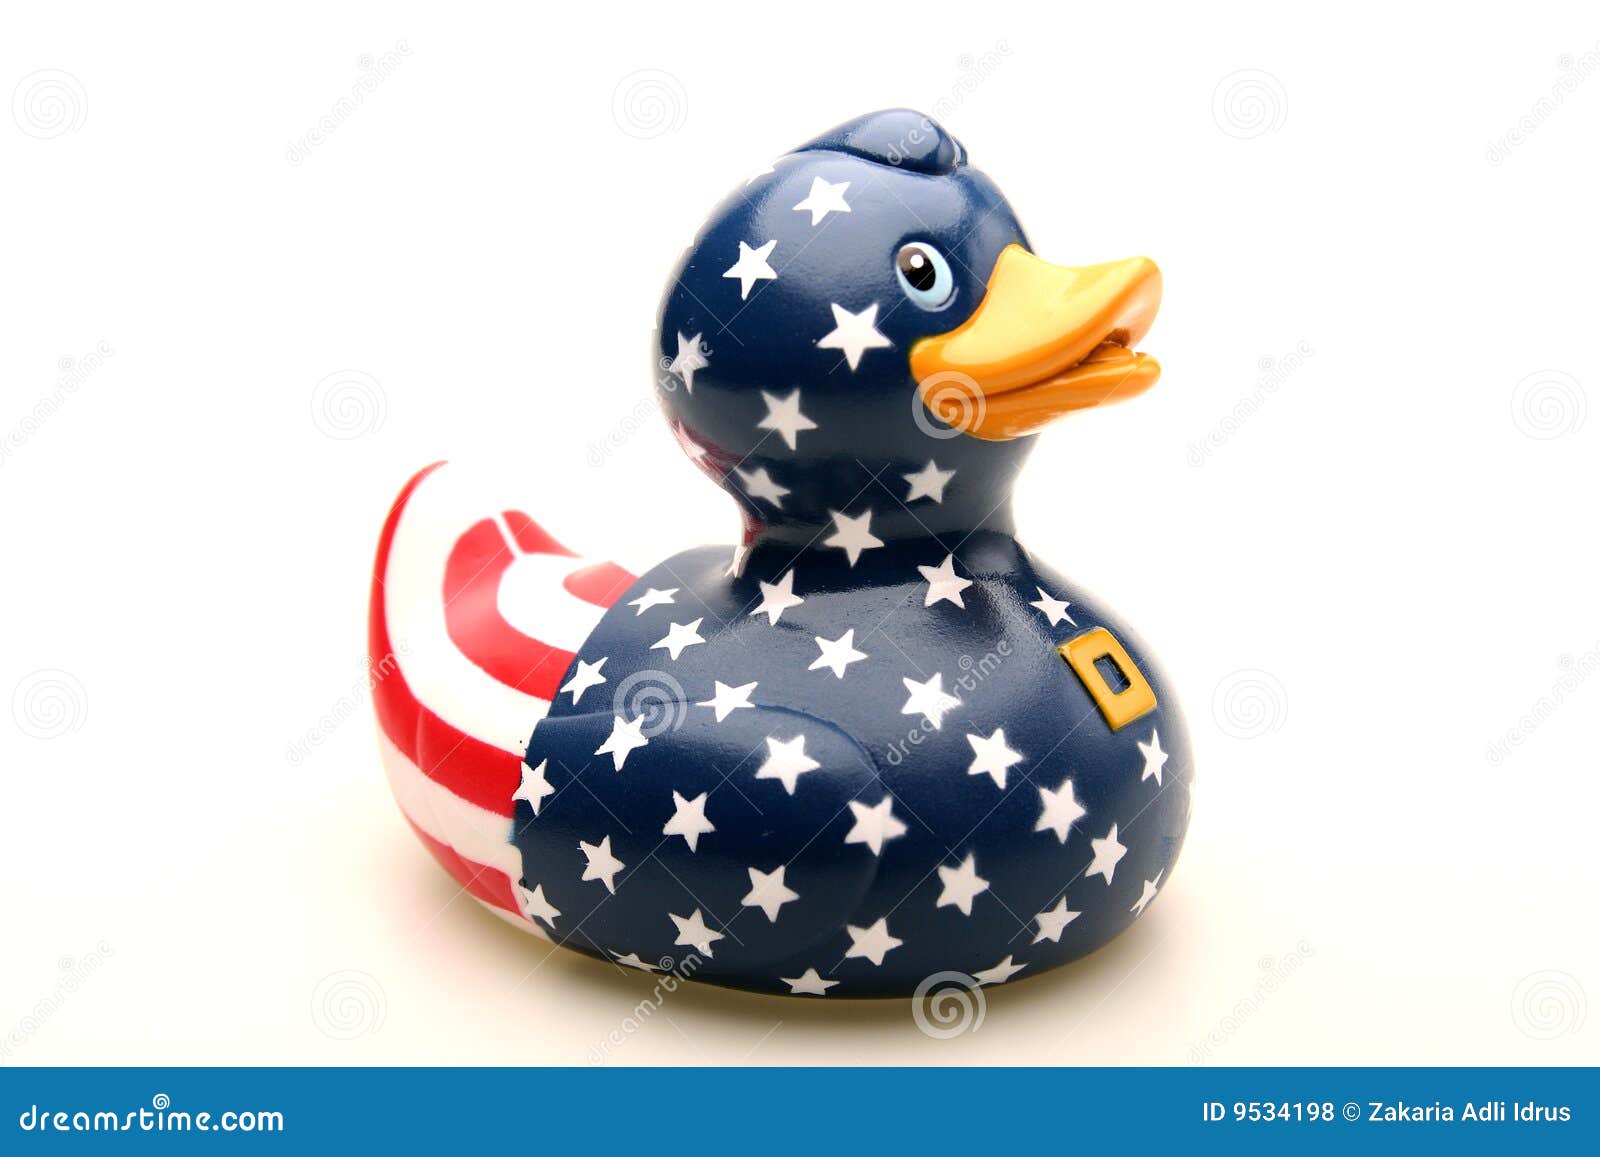 toy rubber duck